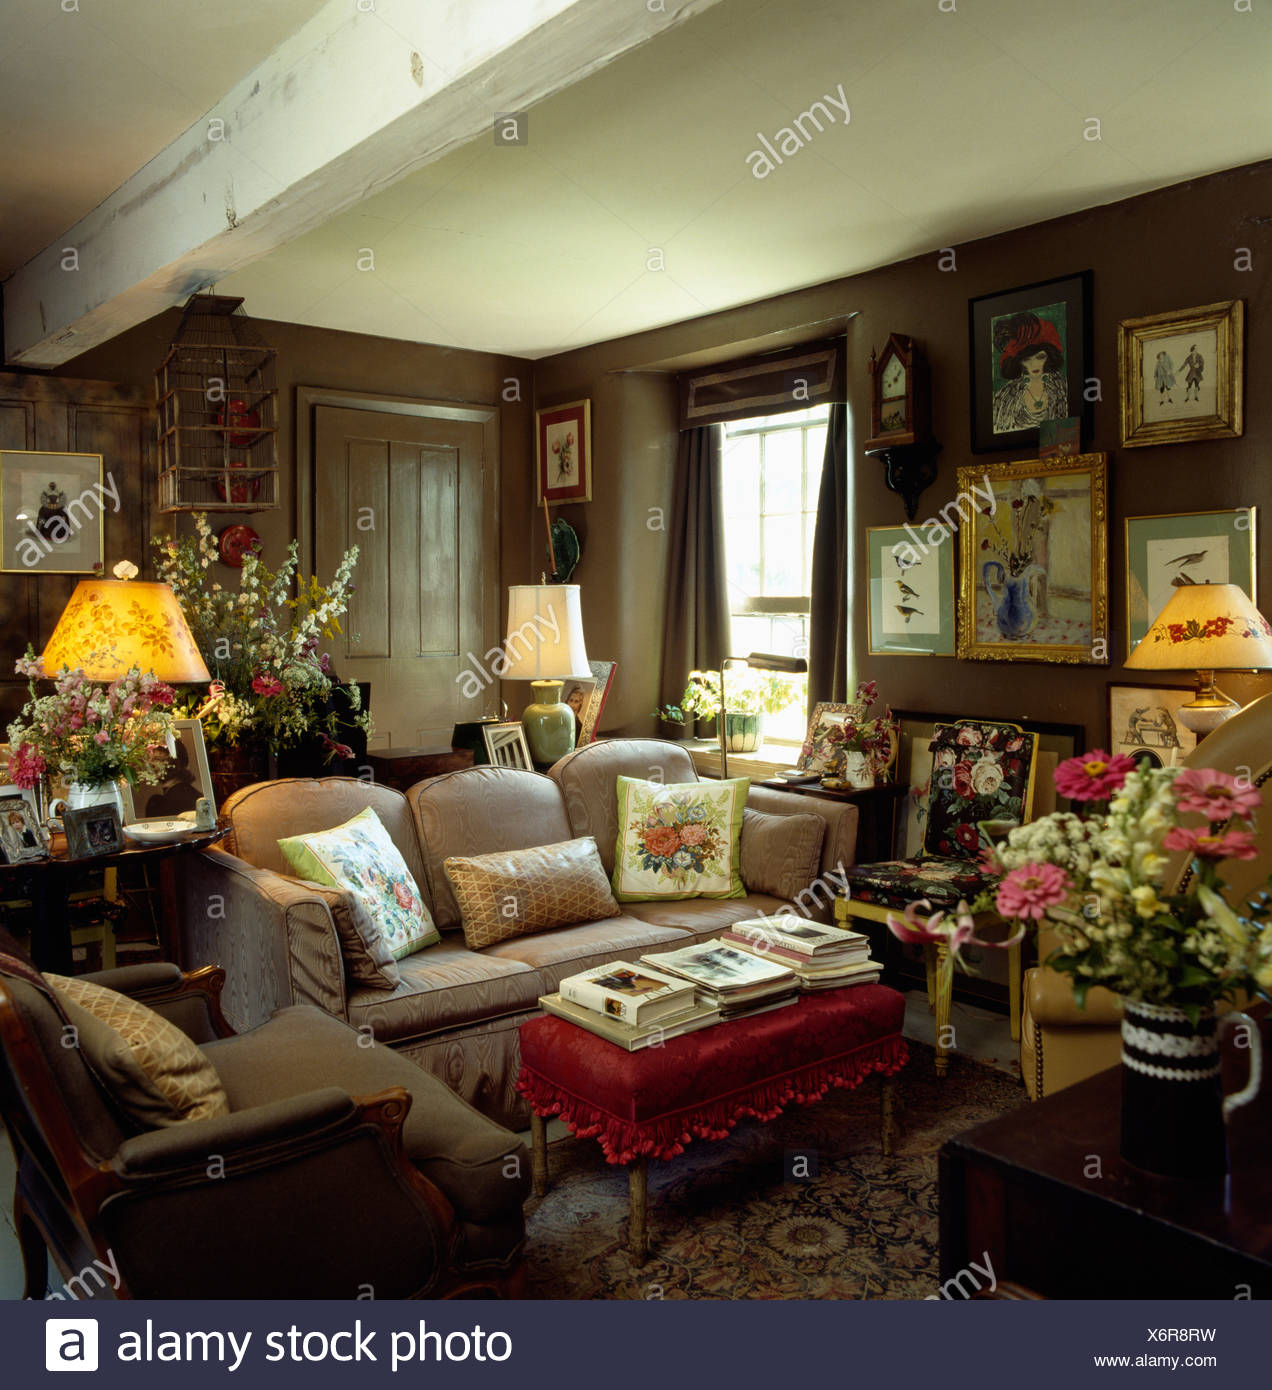 Lighted Lamps And Pictures On Walls Of Brown Country Livingroom With Low Ceiling And Comfortable Furniture Stock Photo Alamy